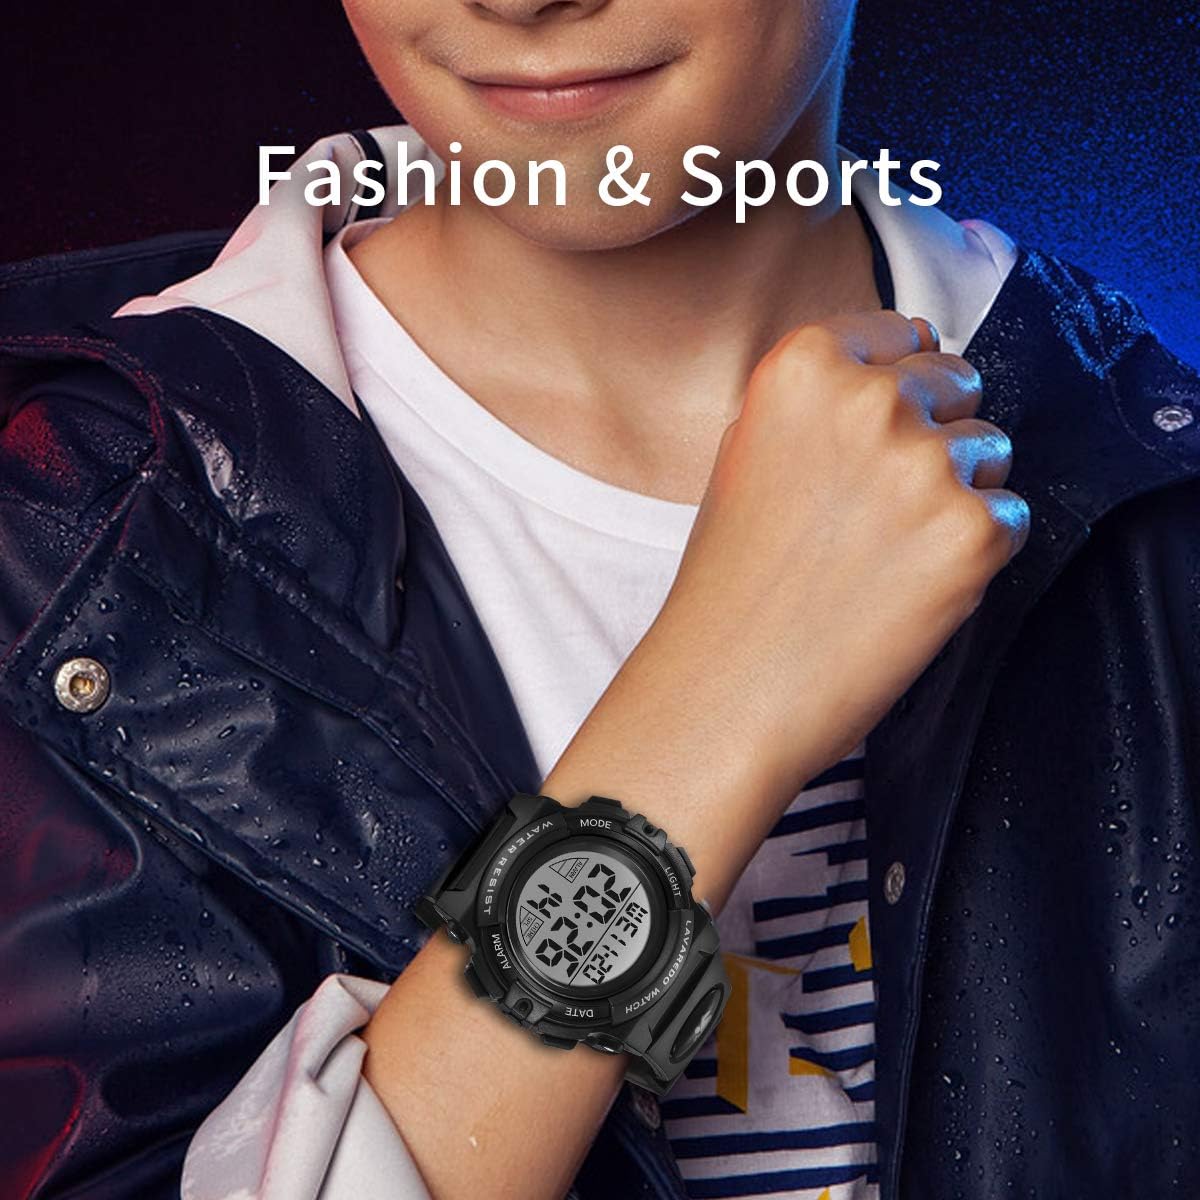 Kids Watch,Boys Watch for 3-12 Year Old Boys,Digital Sport Outdoor Multifunctional Chronograph LED 50 M Waterproof Alarm Calendar Analog Watch for Children with Silicone Band